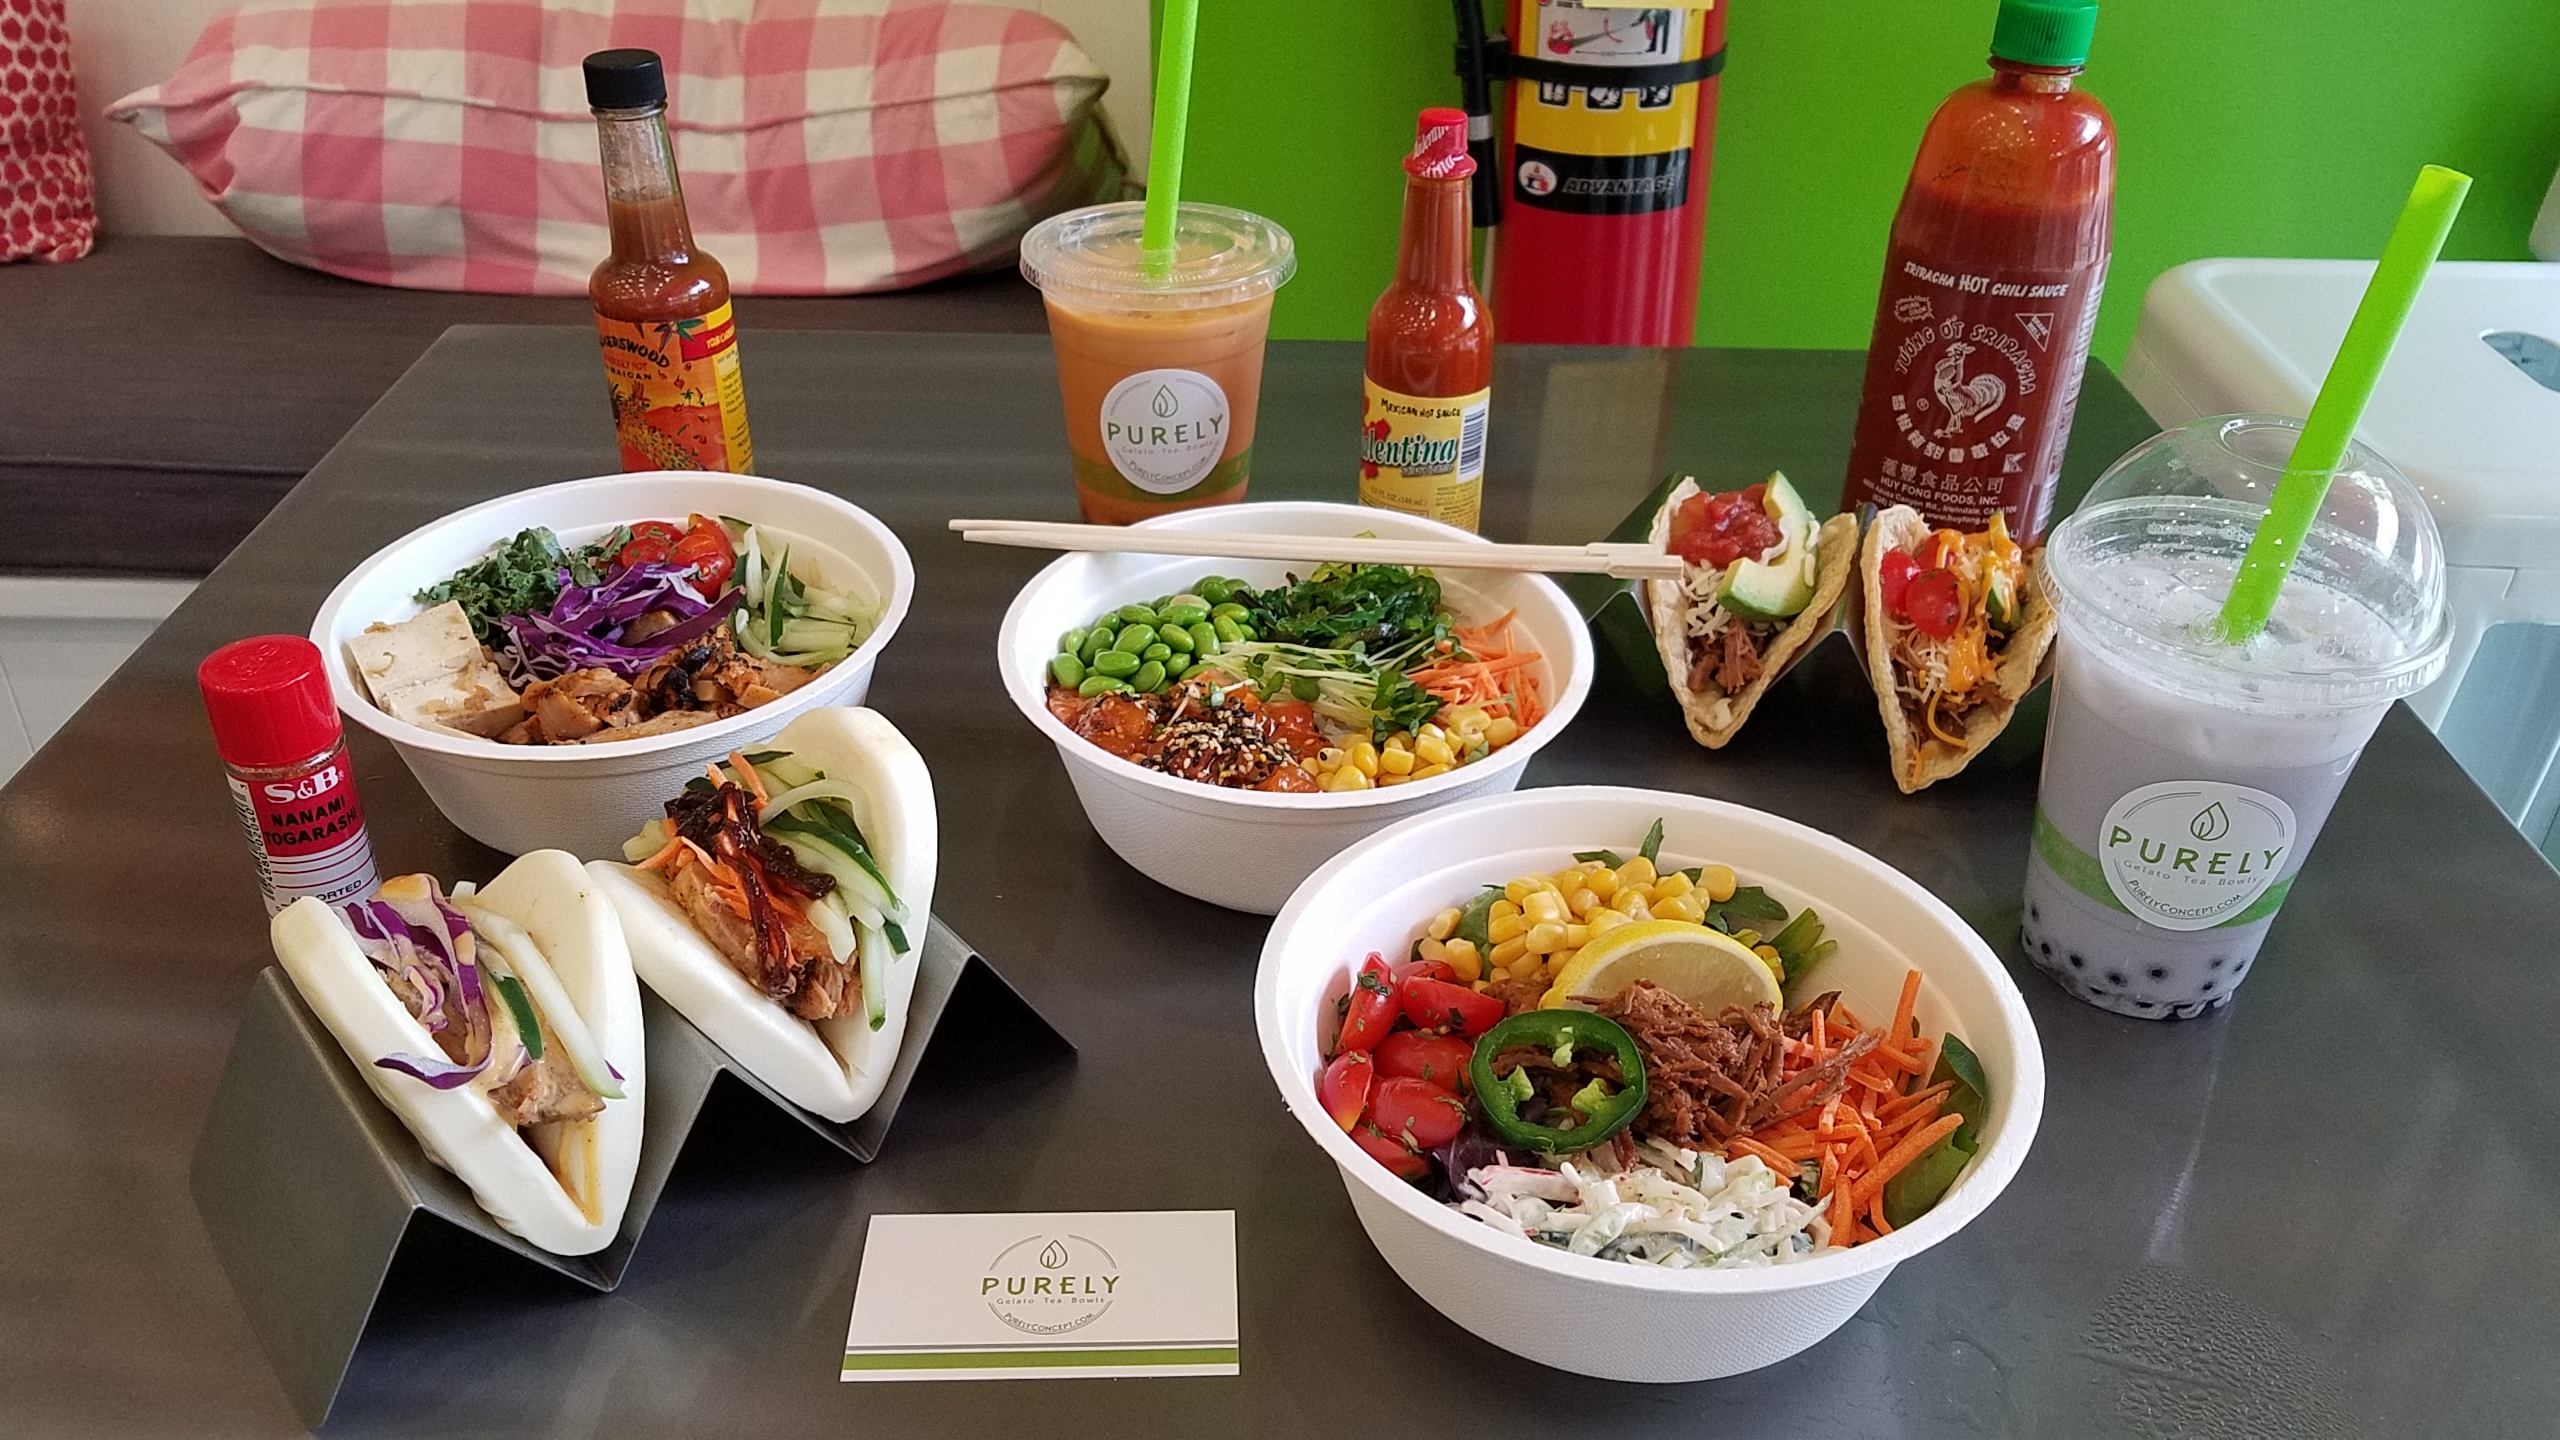 Want Fresh, Fast, and Healthy? Purely is the Place to Be